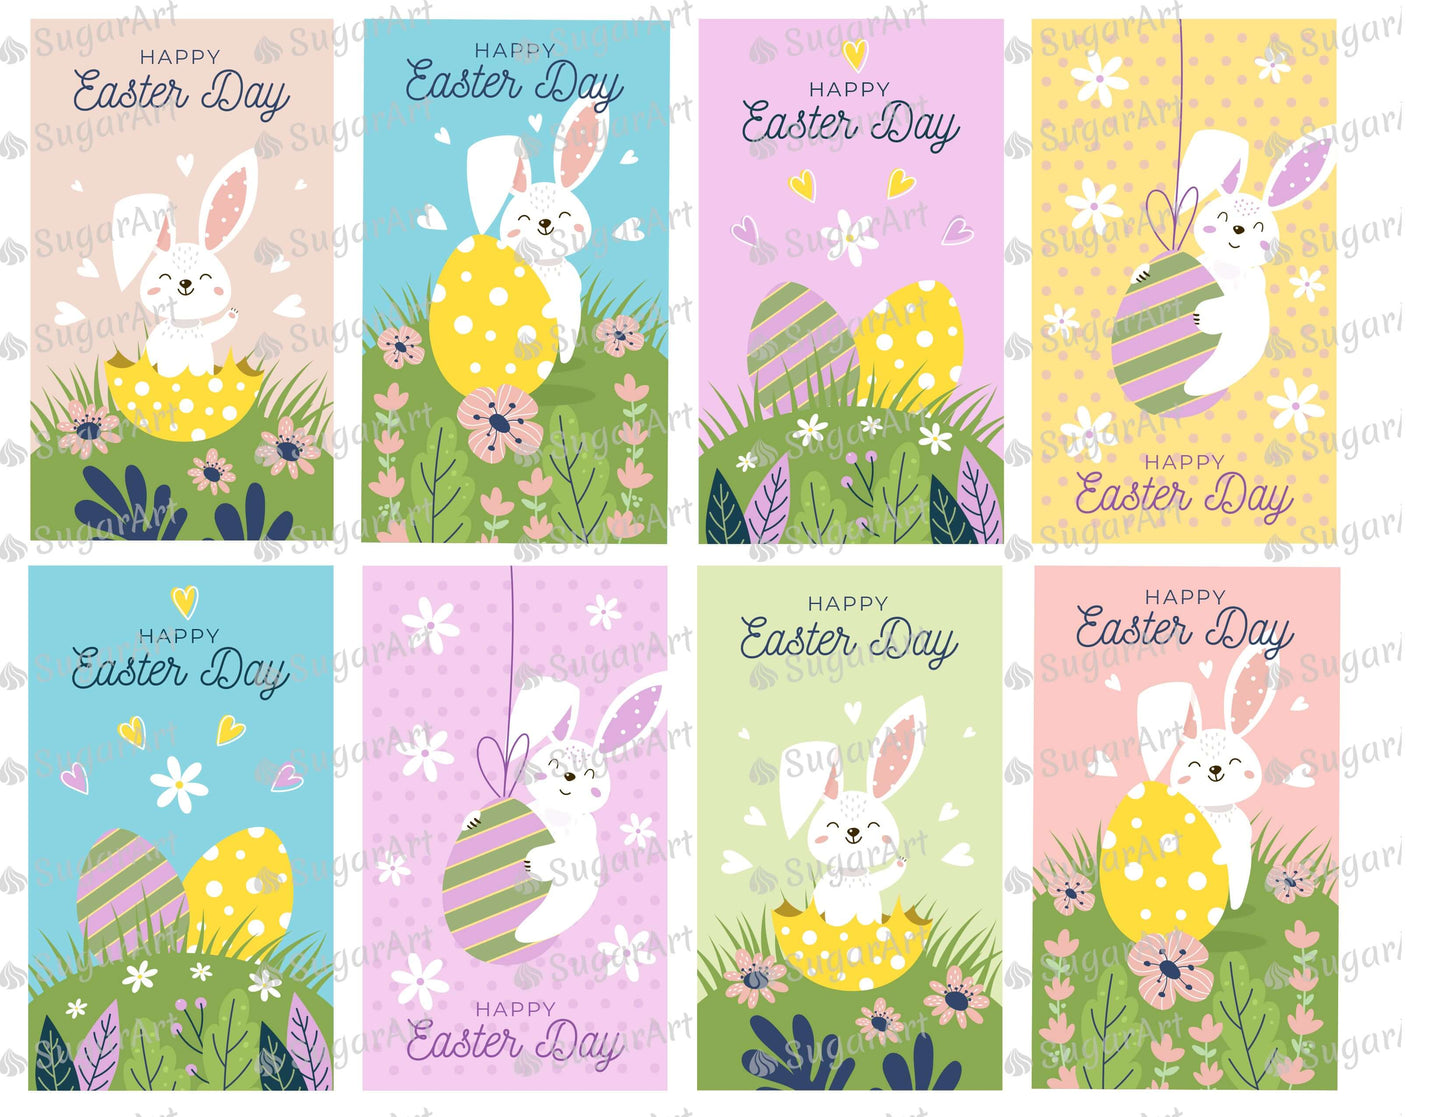 Set of Happy Easter Day Designs - Icing - ISA251.